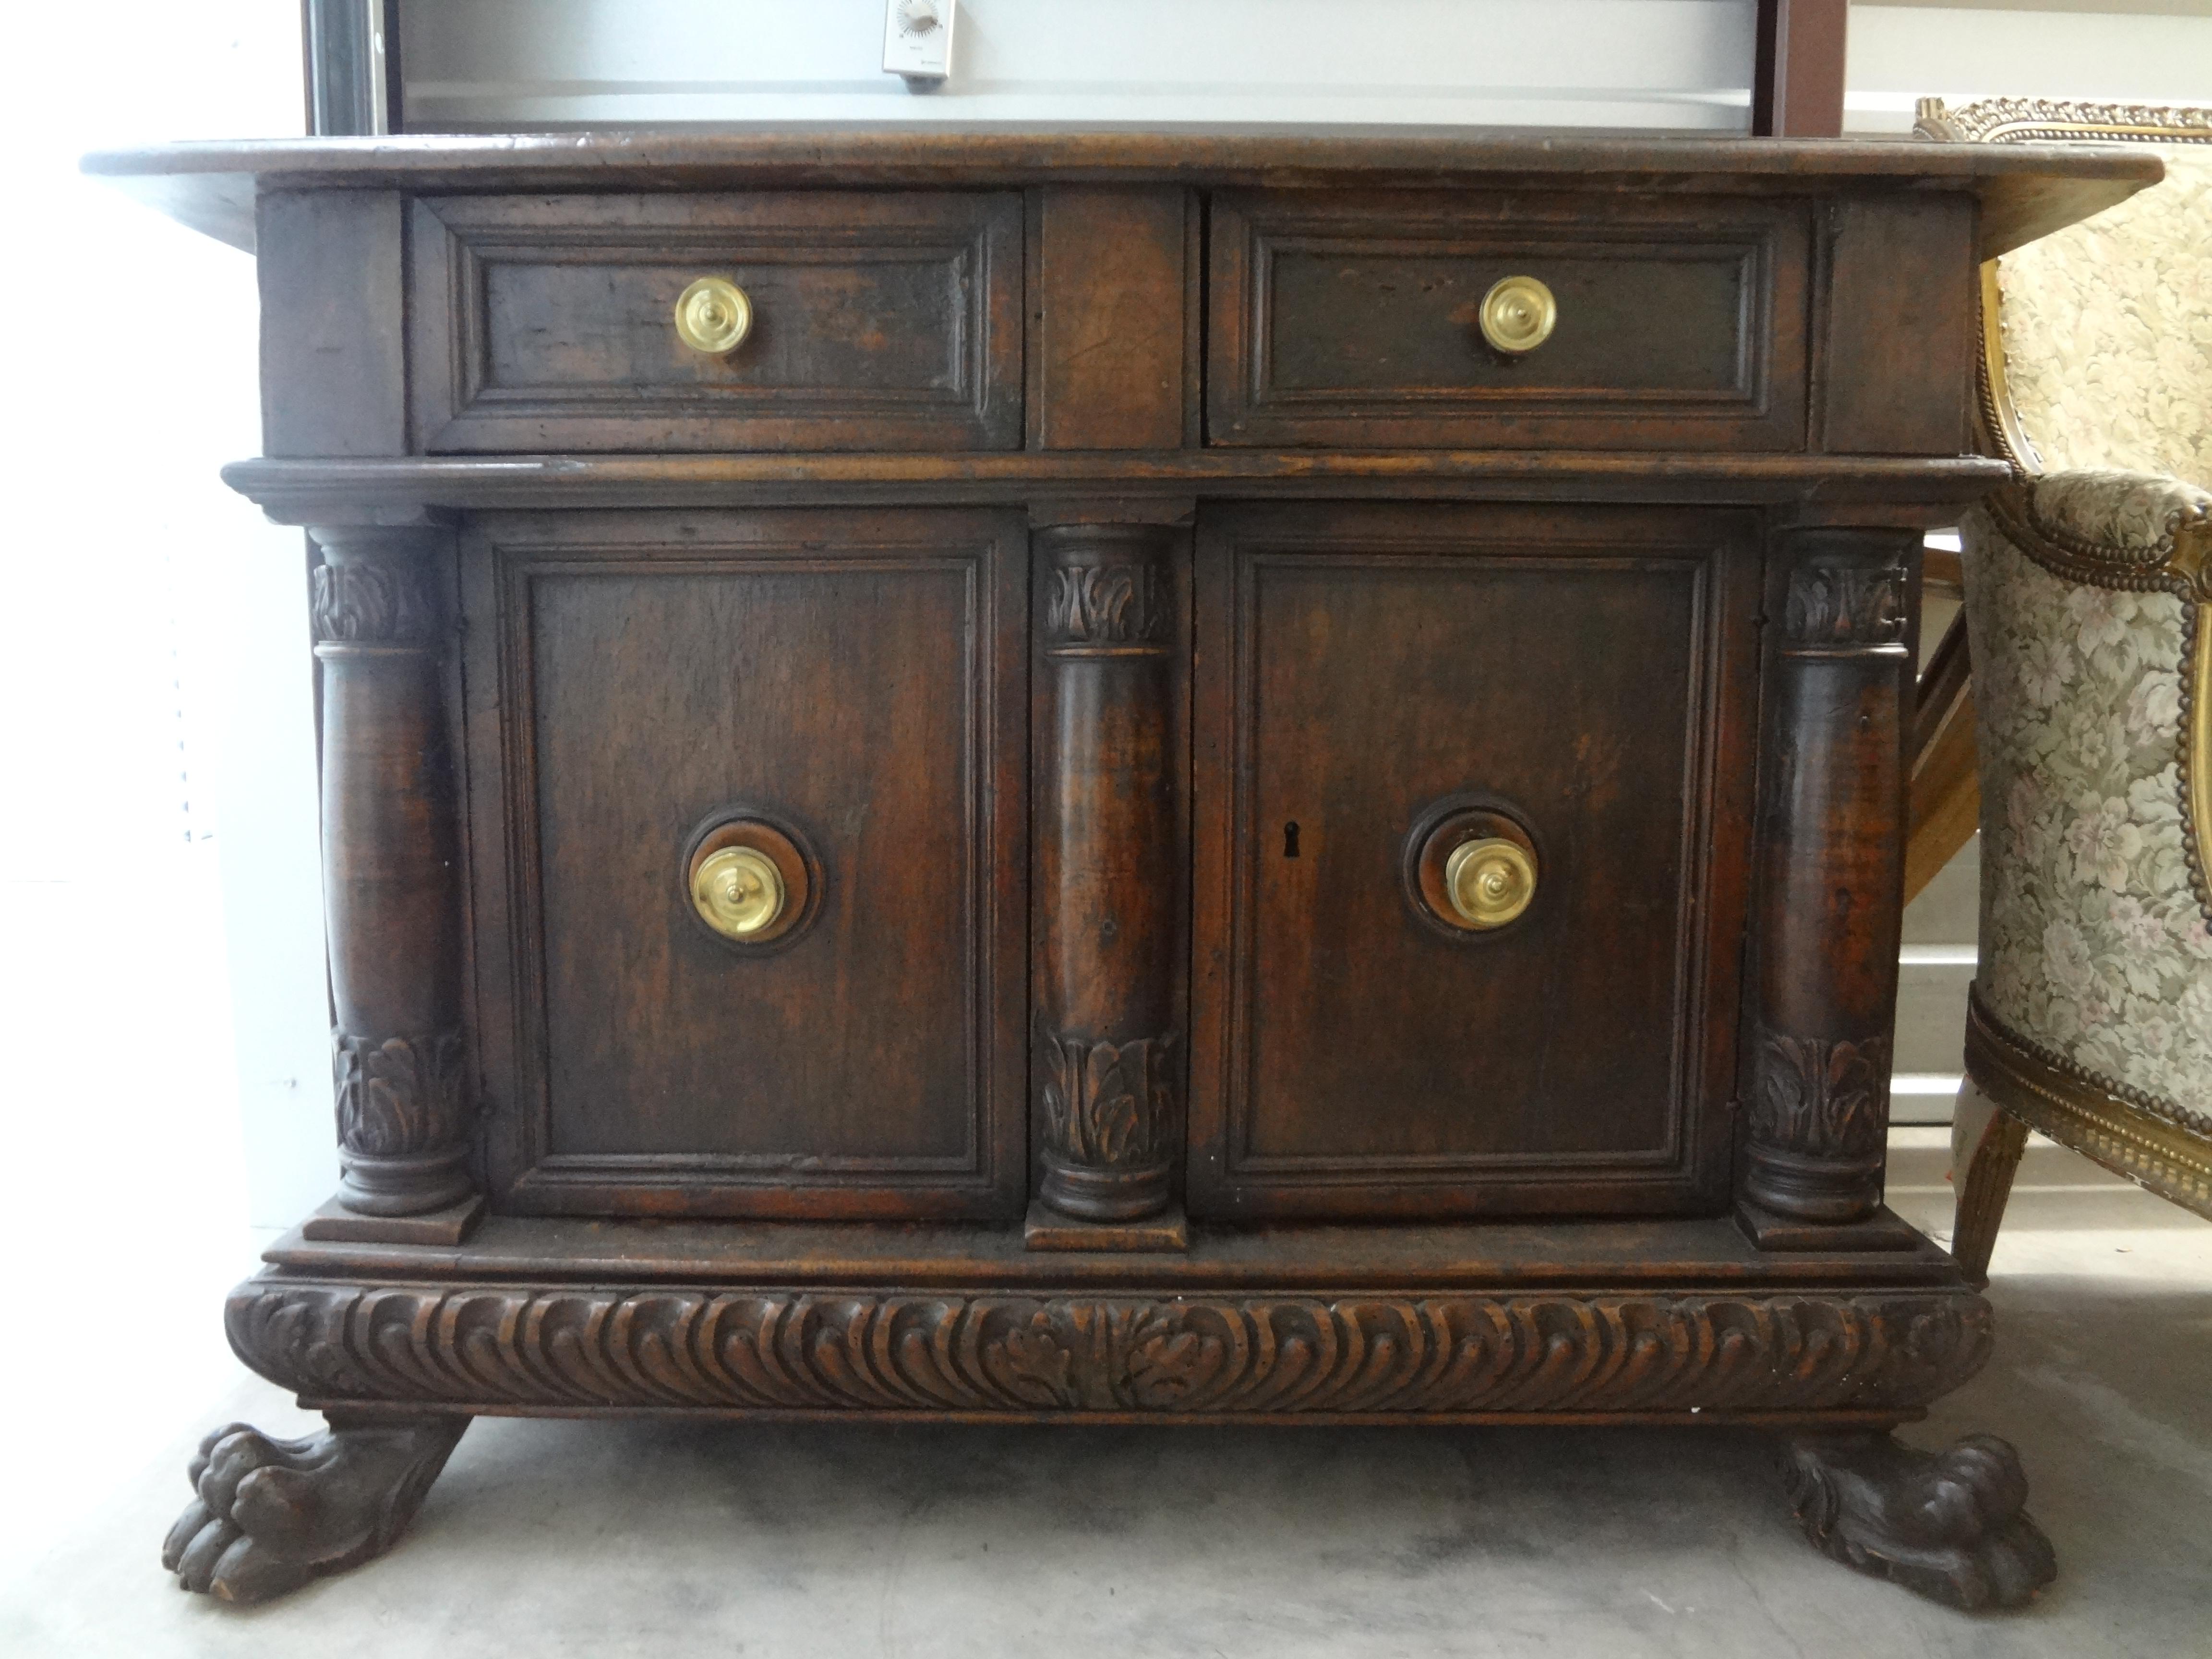 18th Century Tuscan Cabinet.
This handsome antique Tuscan cabinet or buffet has two drawers above two cabinet doors below with great original brass hardware and paw feet.
Our versatile Italian cabinet can be used in many rooms including a dining